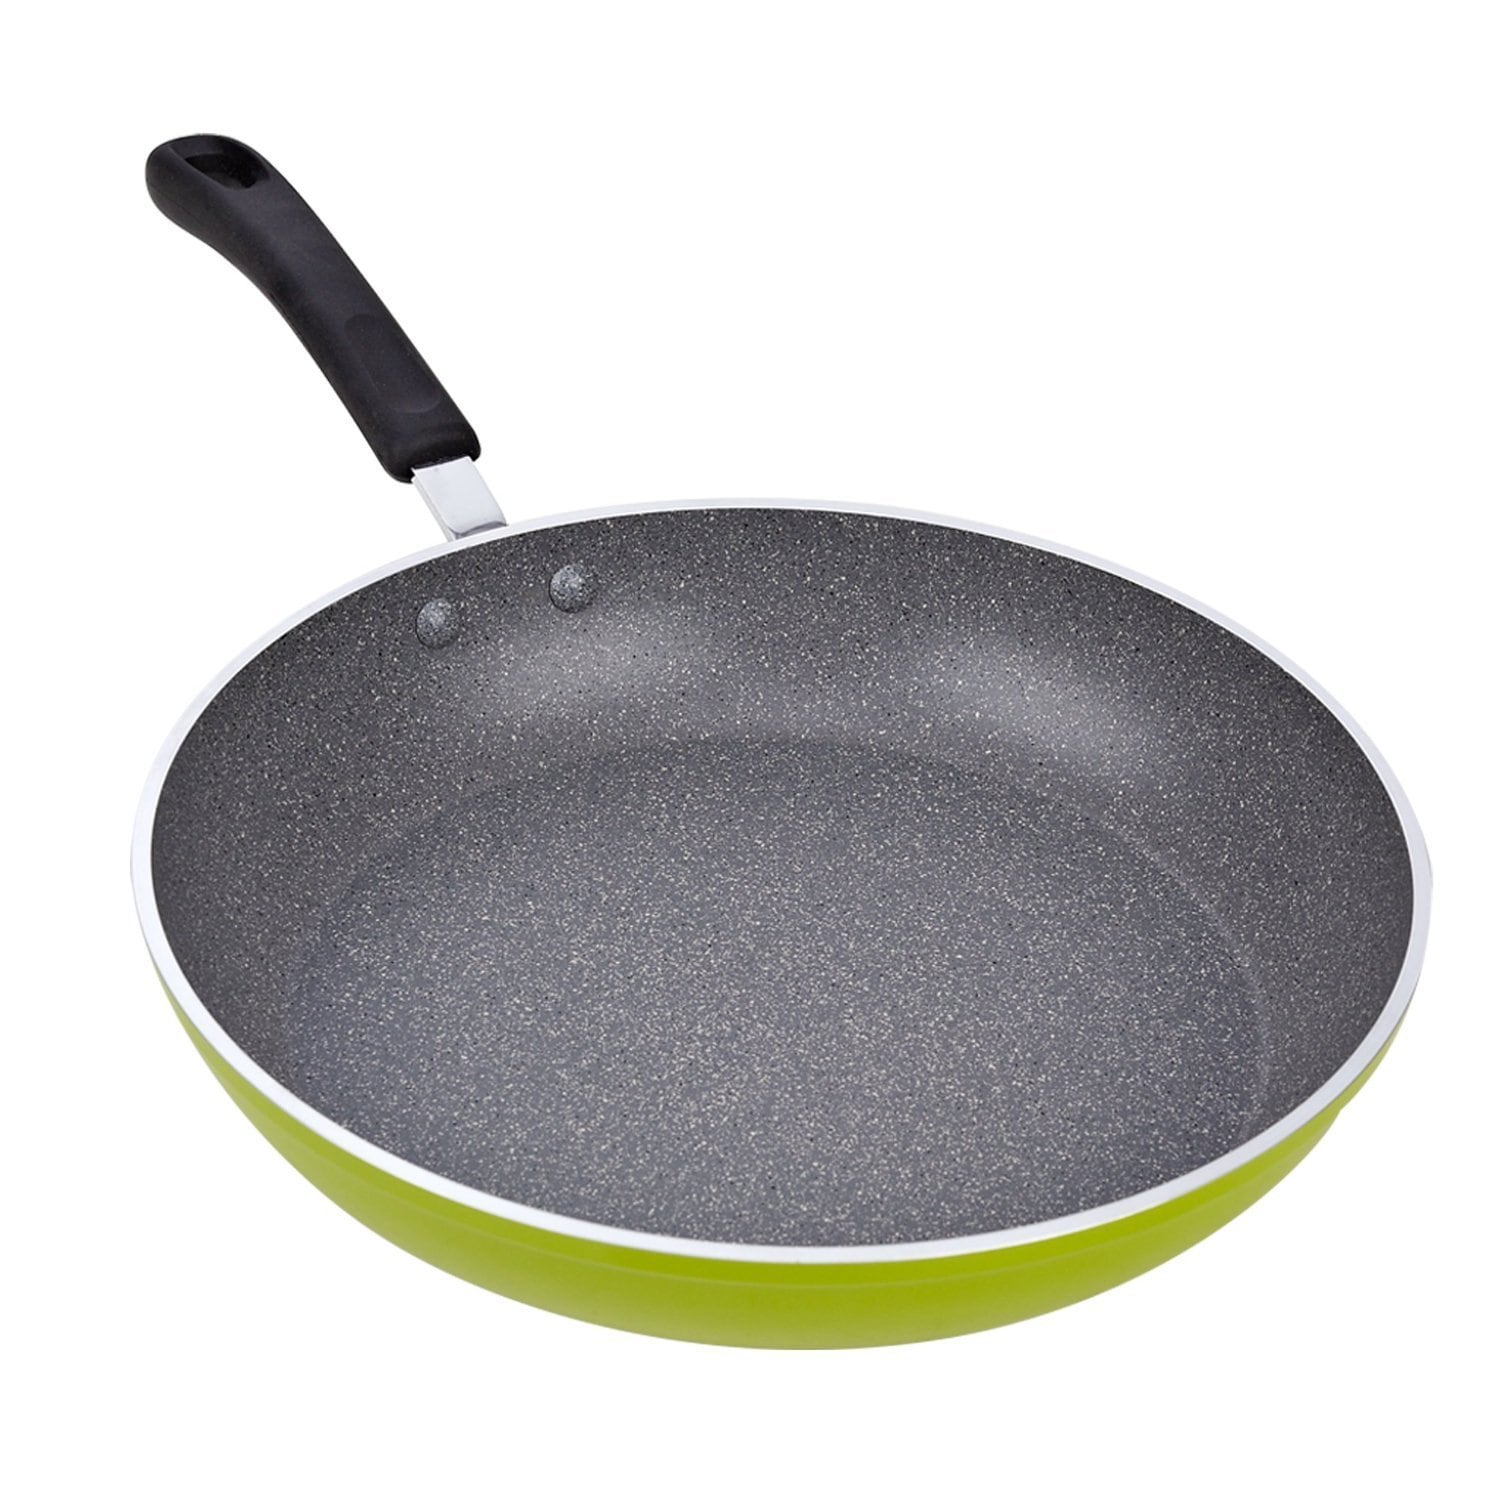 12 inch non stick frying pan with lid